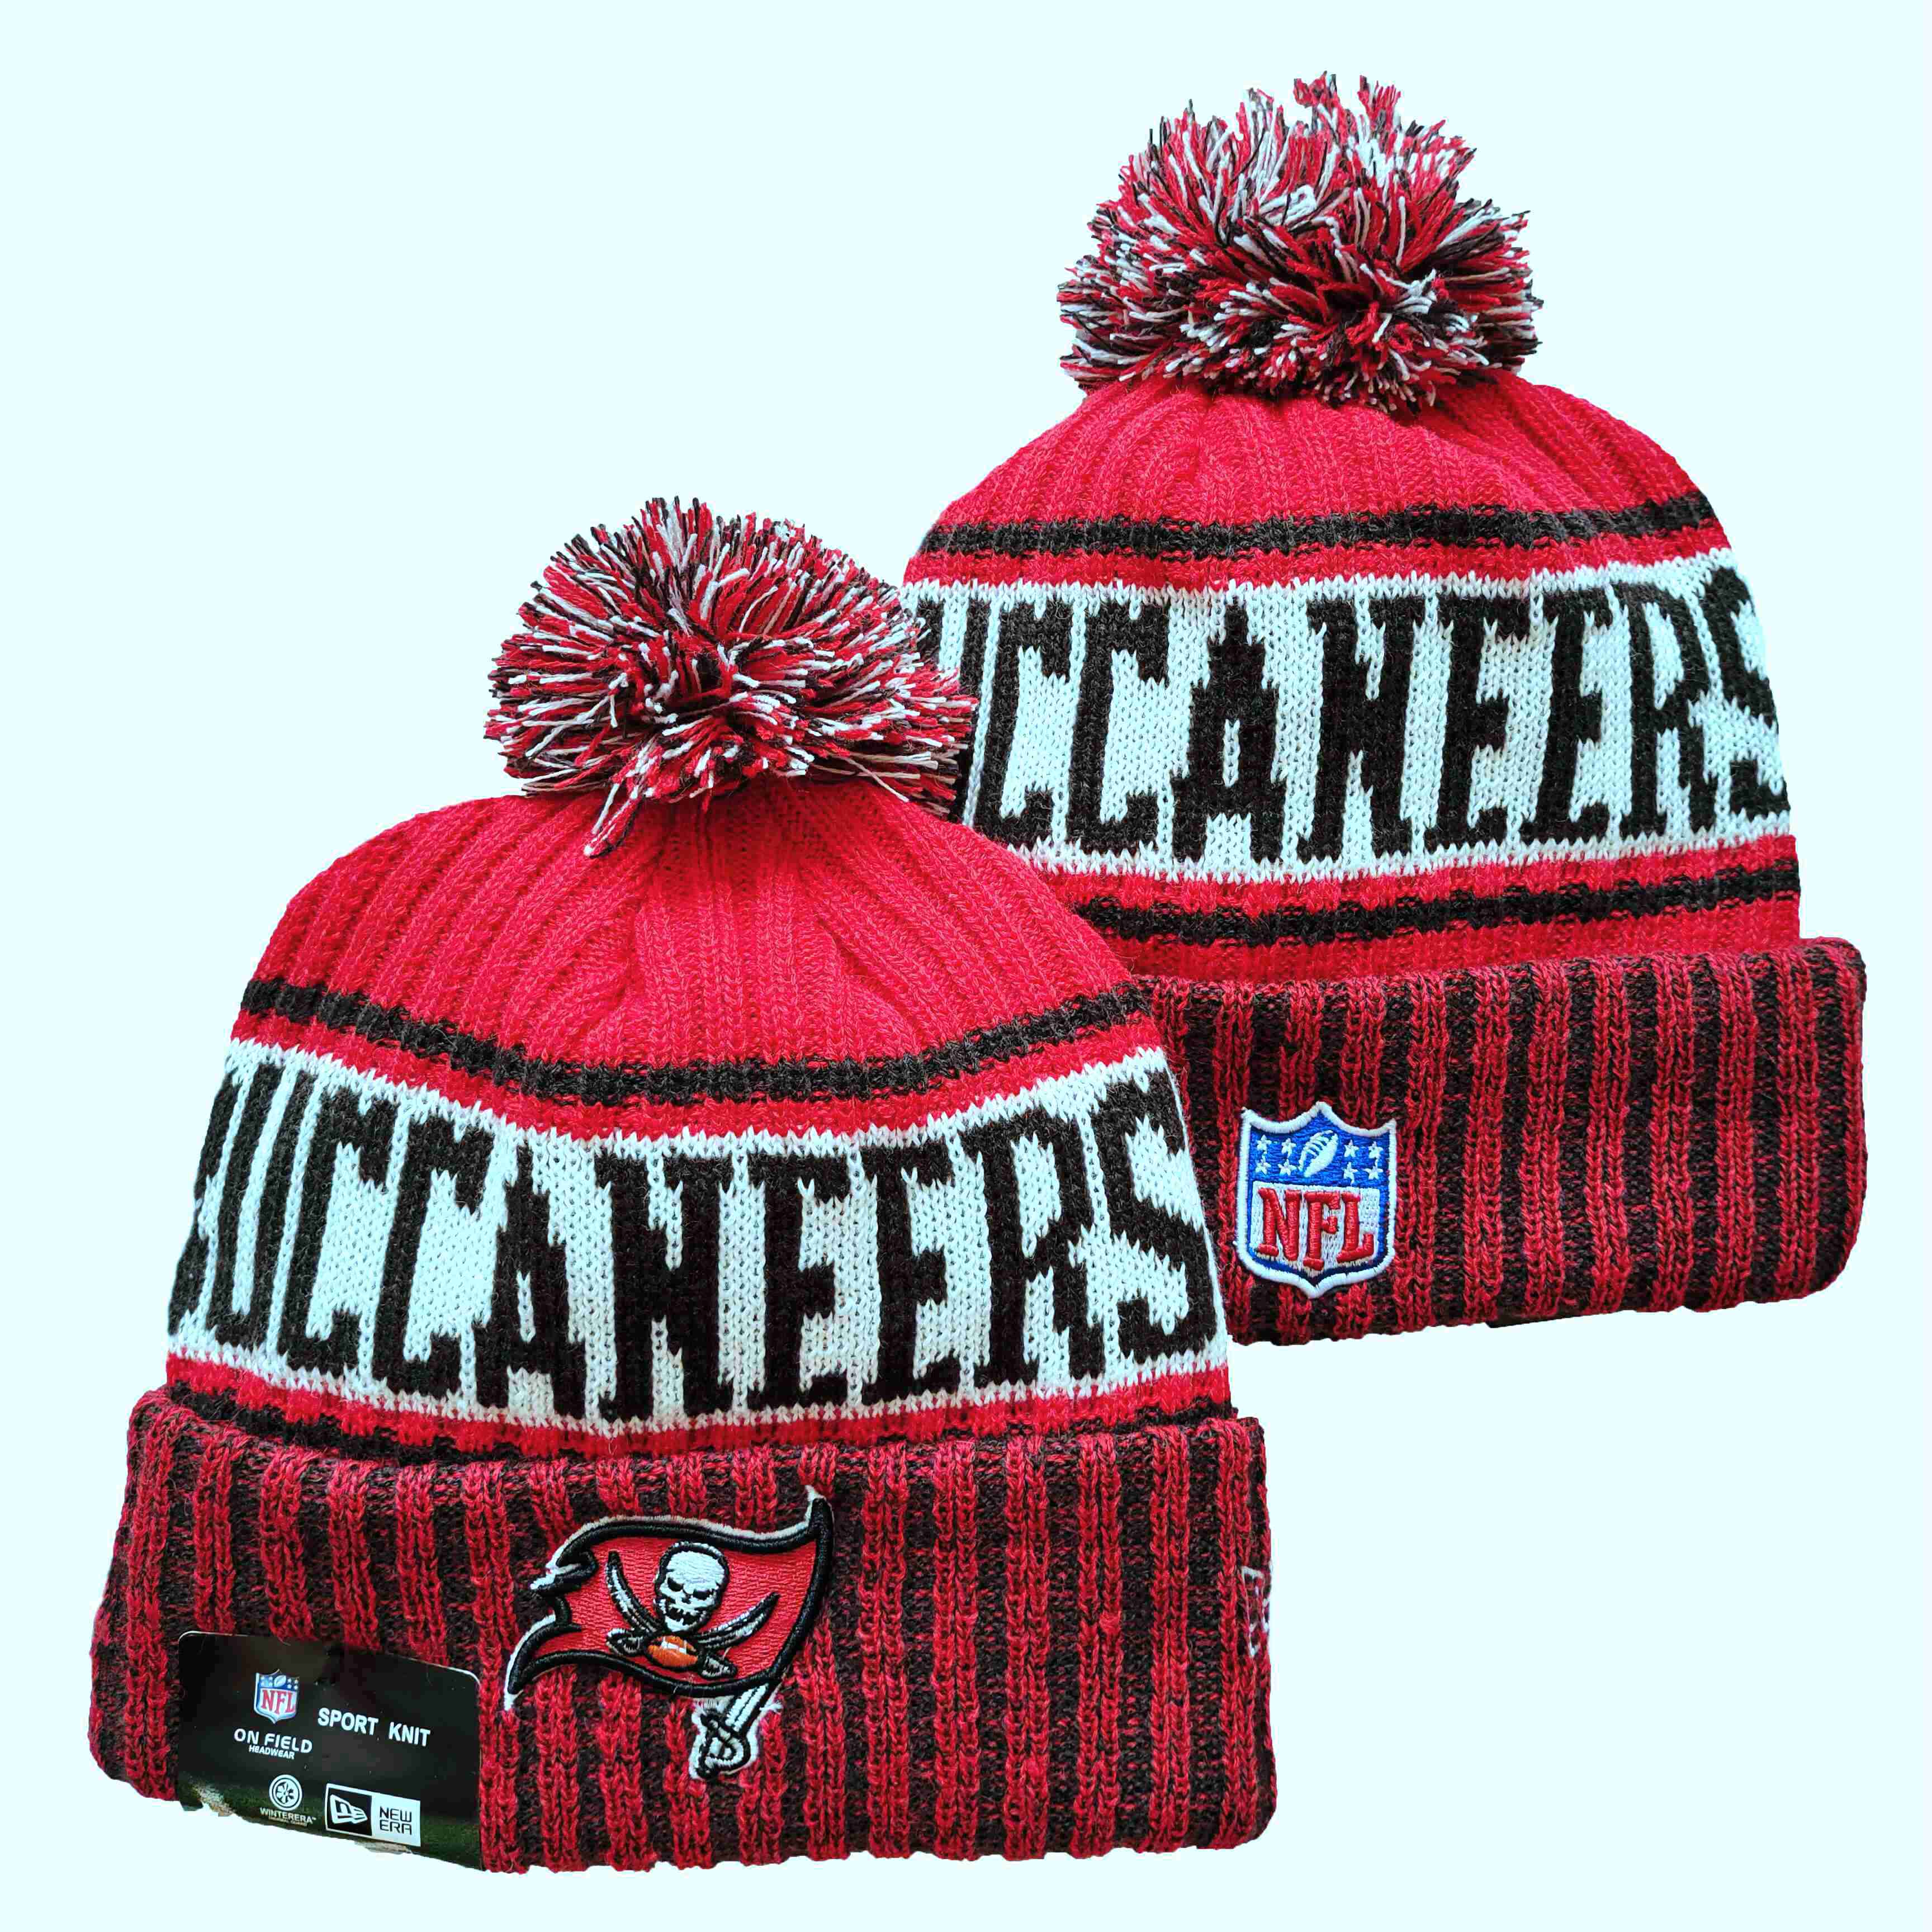 NFL Tampa Bay Buccaneers Beanies Knit Hats-YD1291